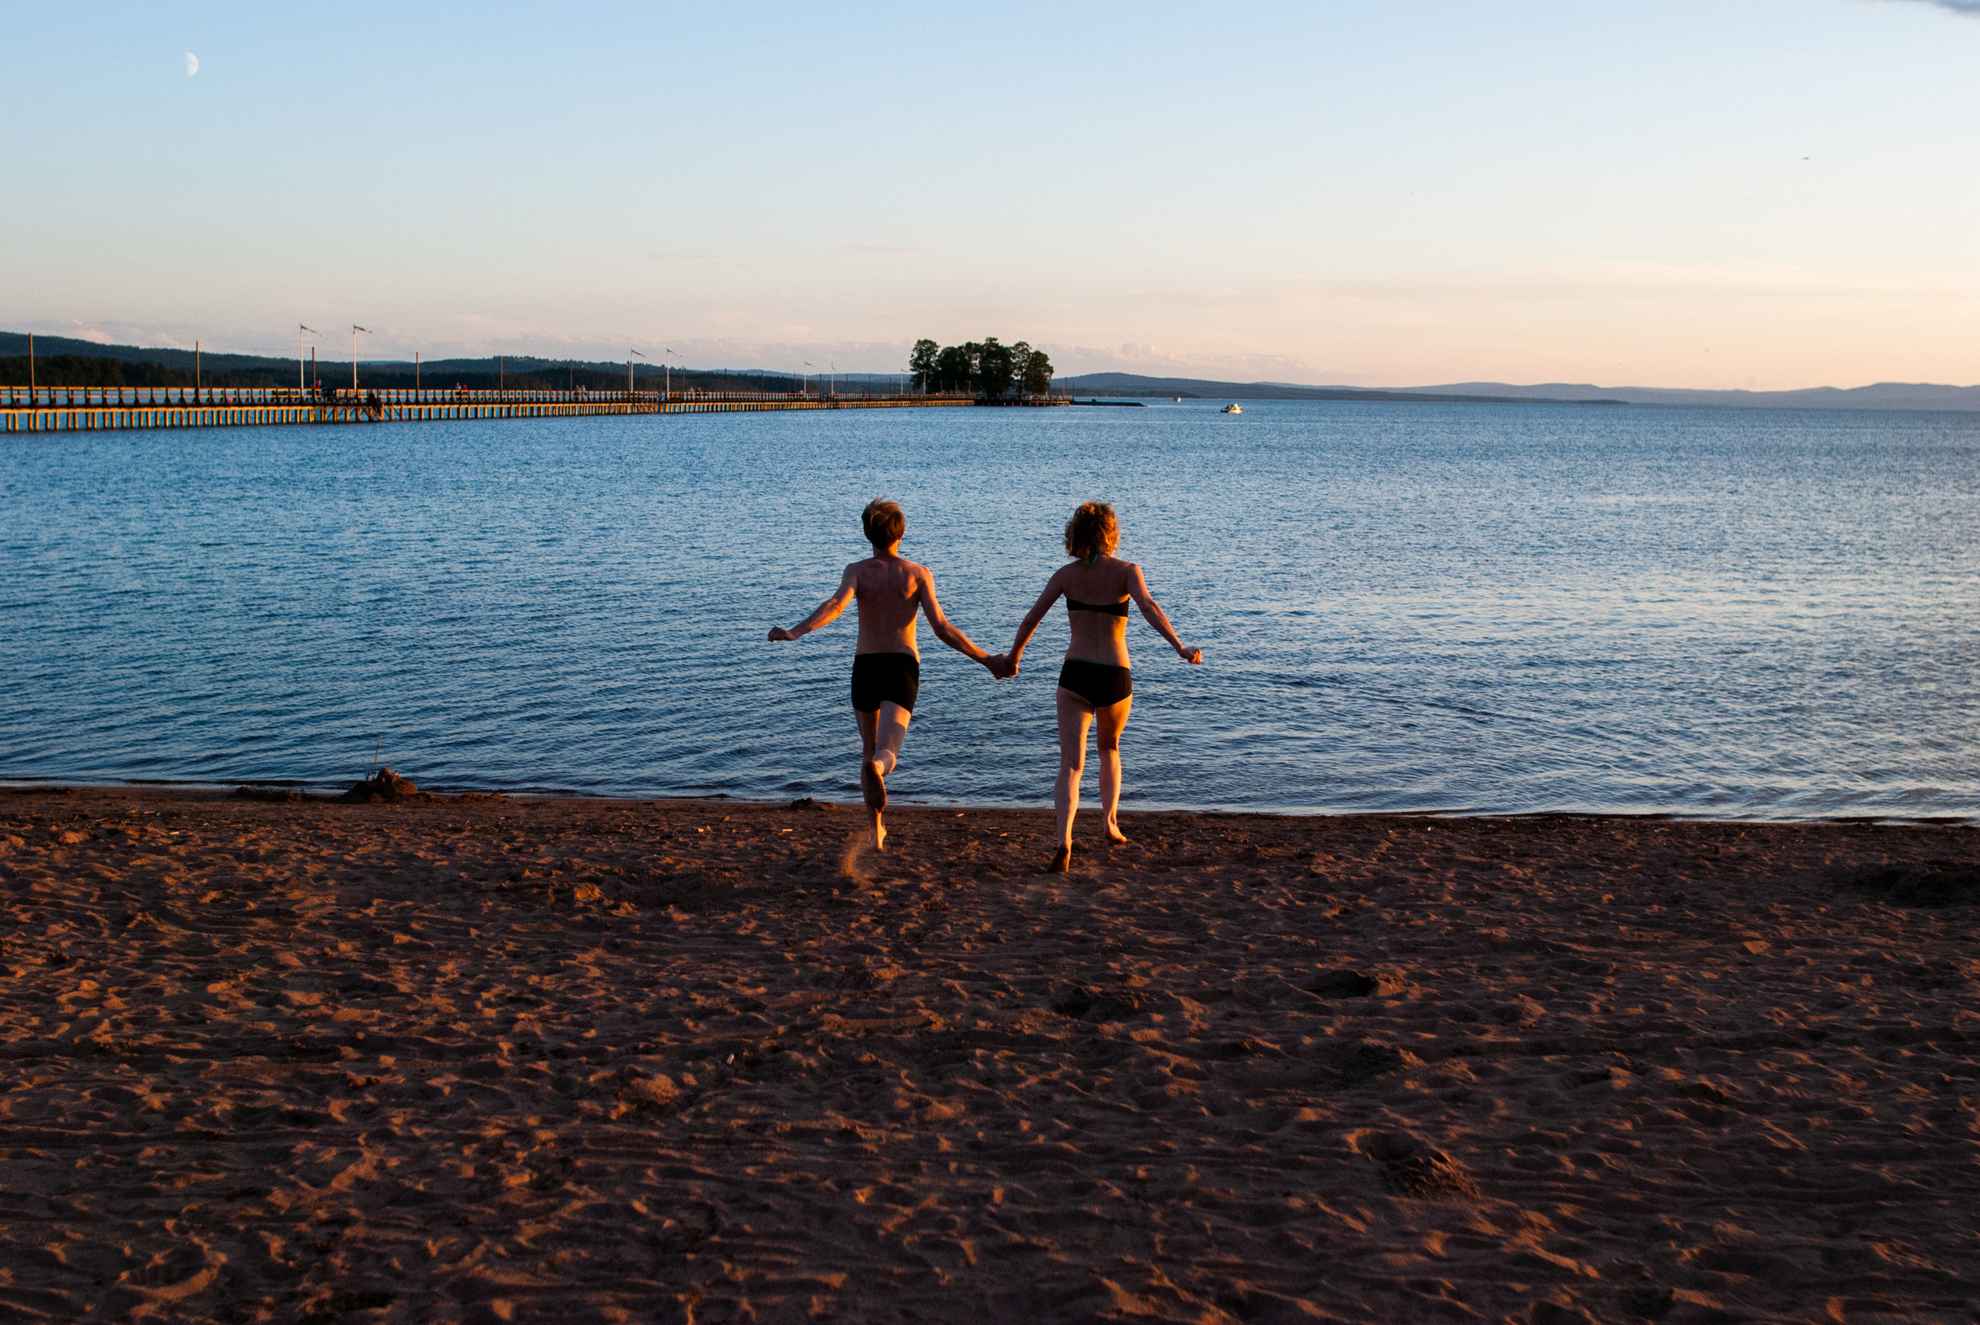 Two people in bathing suits running on a beach towards the water.